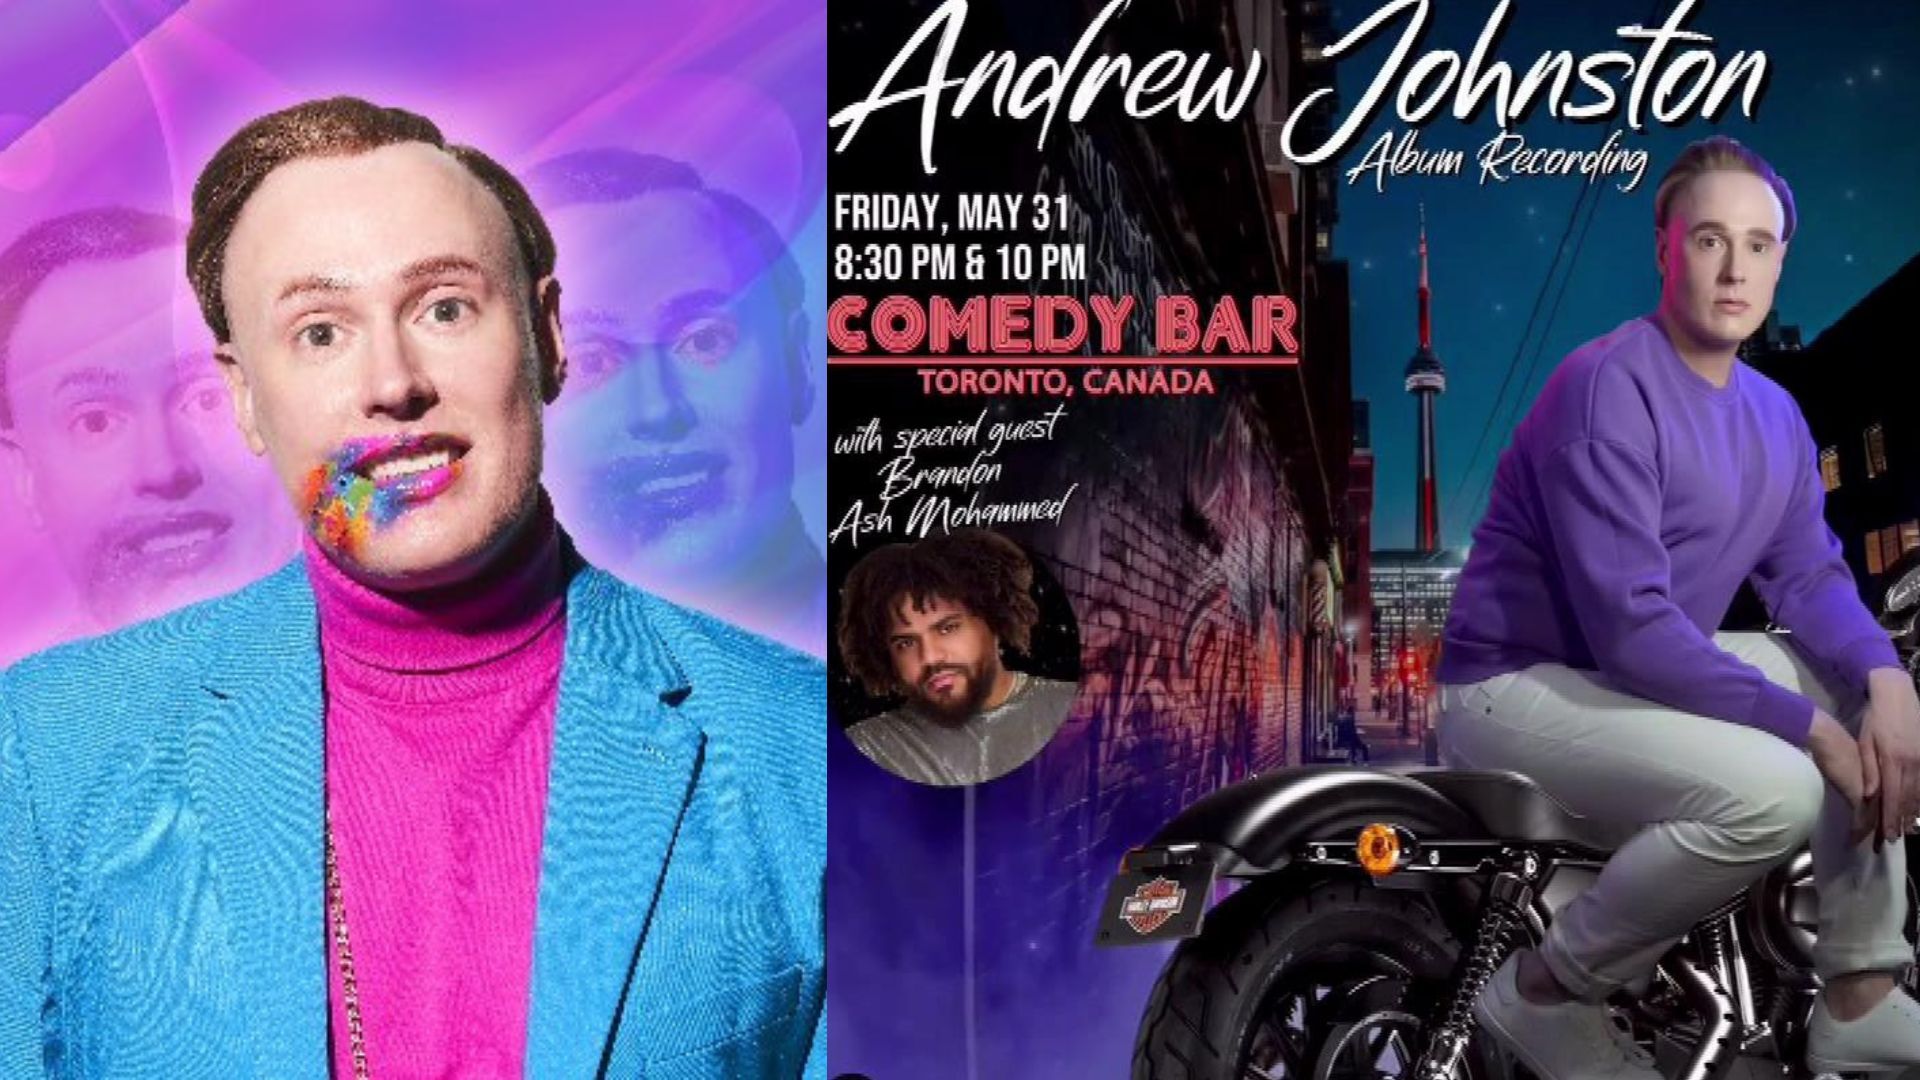 Iconic Canadian comedian Andrew Johnston on dropping his 4th comedy album